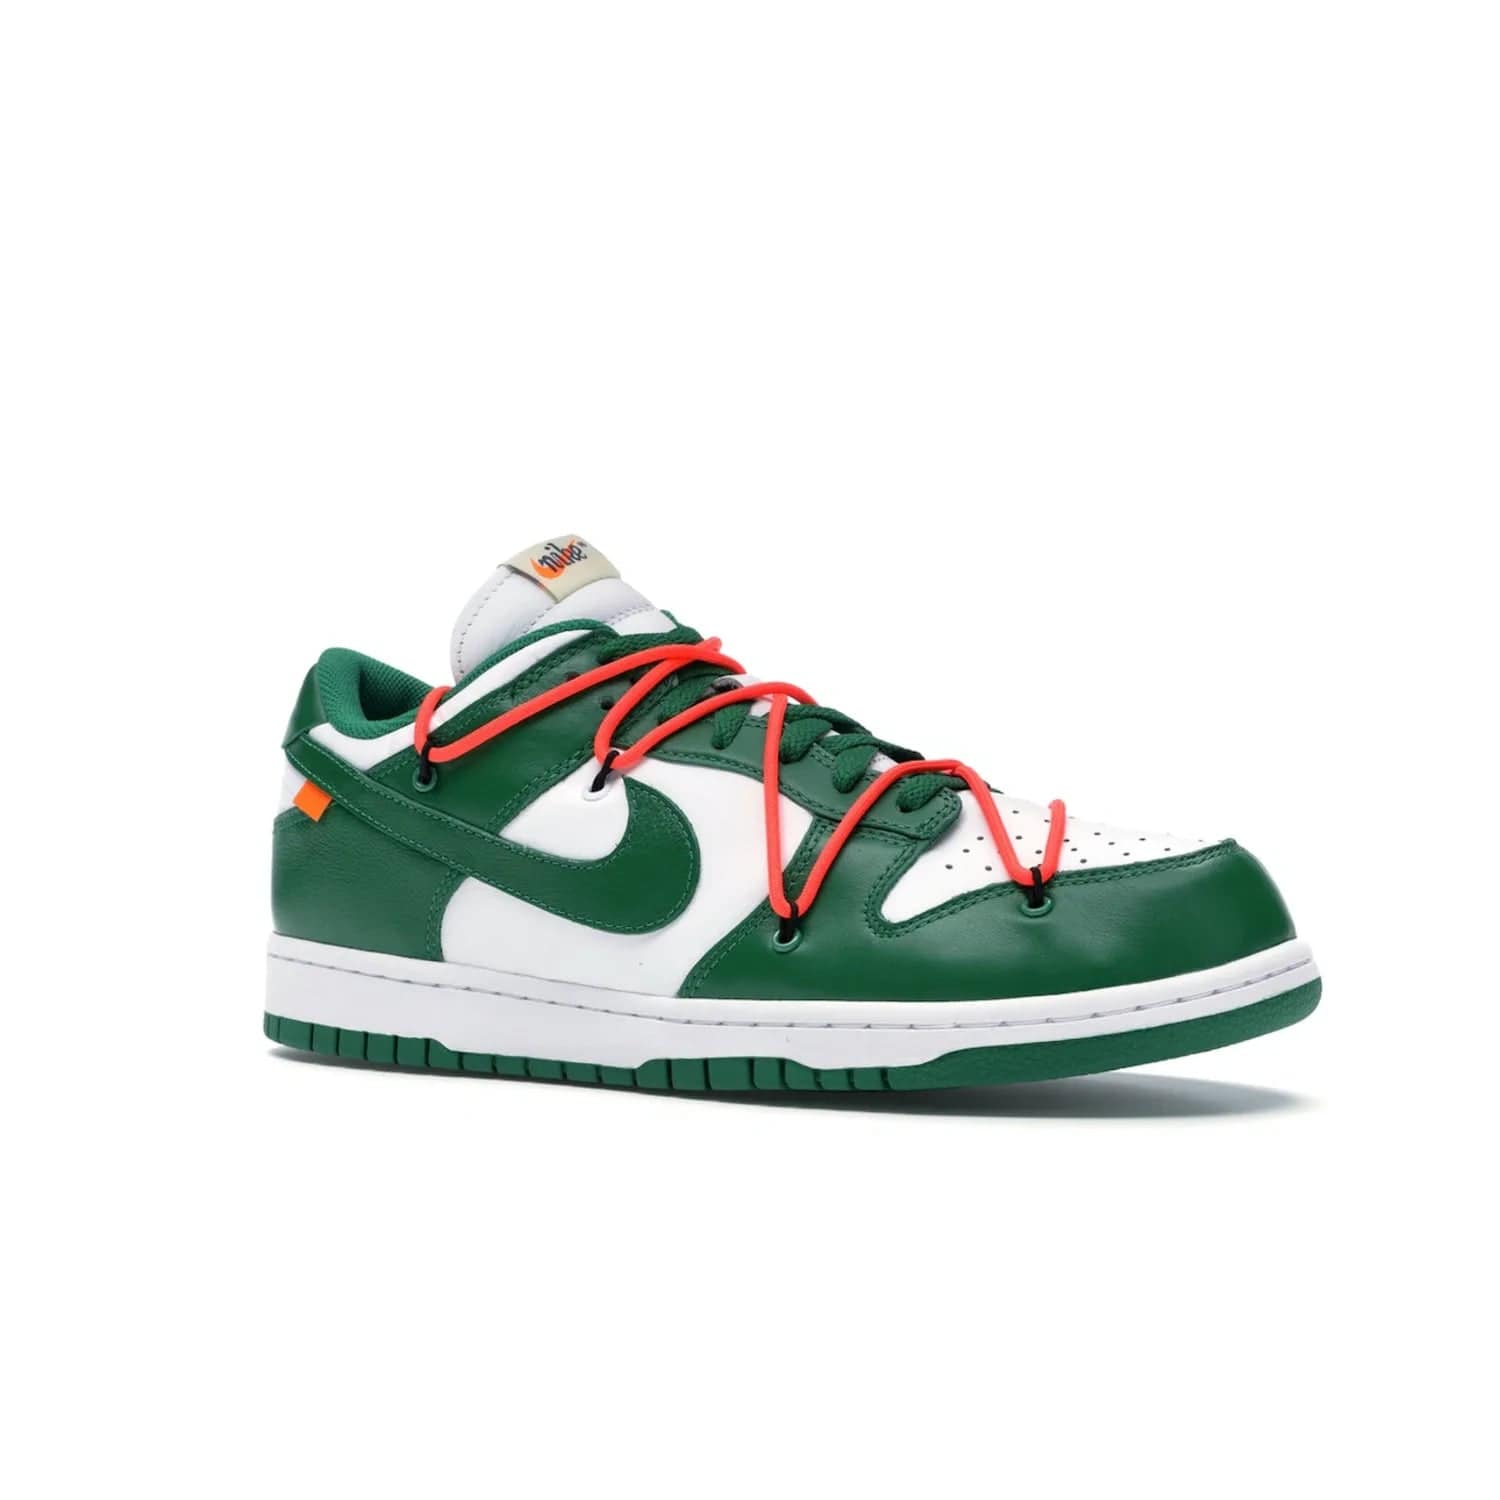 Nike Dunk Low Off-White Pine Green - Image 4 - Only at www.BallersClubKickz.com - The Nike Dunk Low Off-White Pine Green combines classic 1980s style with modern-day design. Featuring white leather uppers and pine green overlays, these classic kicks feature secondary lacing system, zip-ties and signature Off-White text. Releasing in December 2019, these shoes are a timeless classic for any wardrobe.